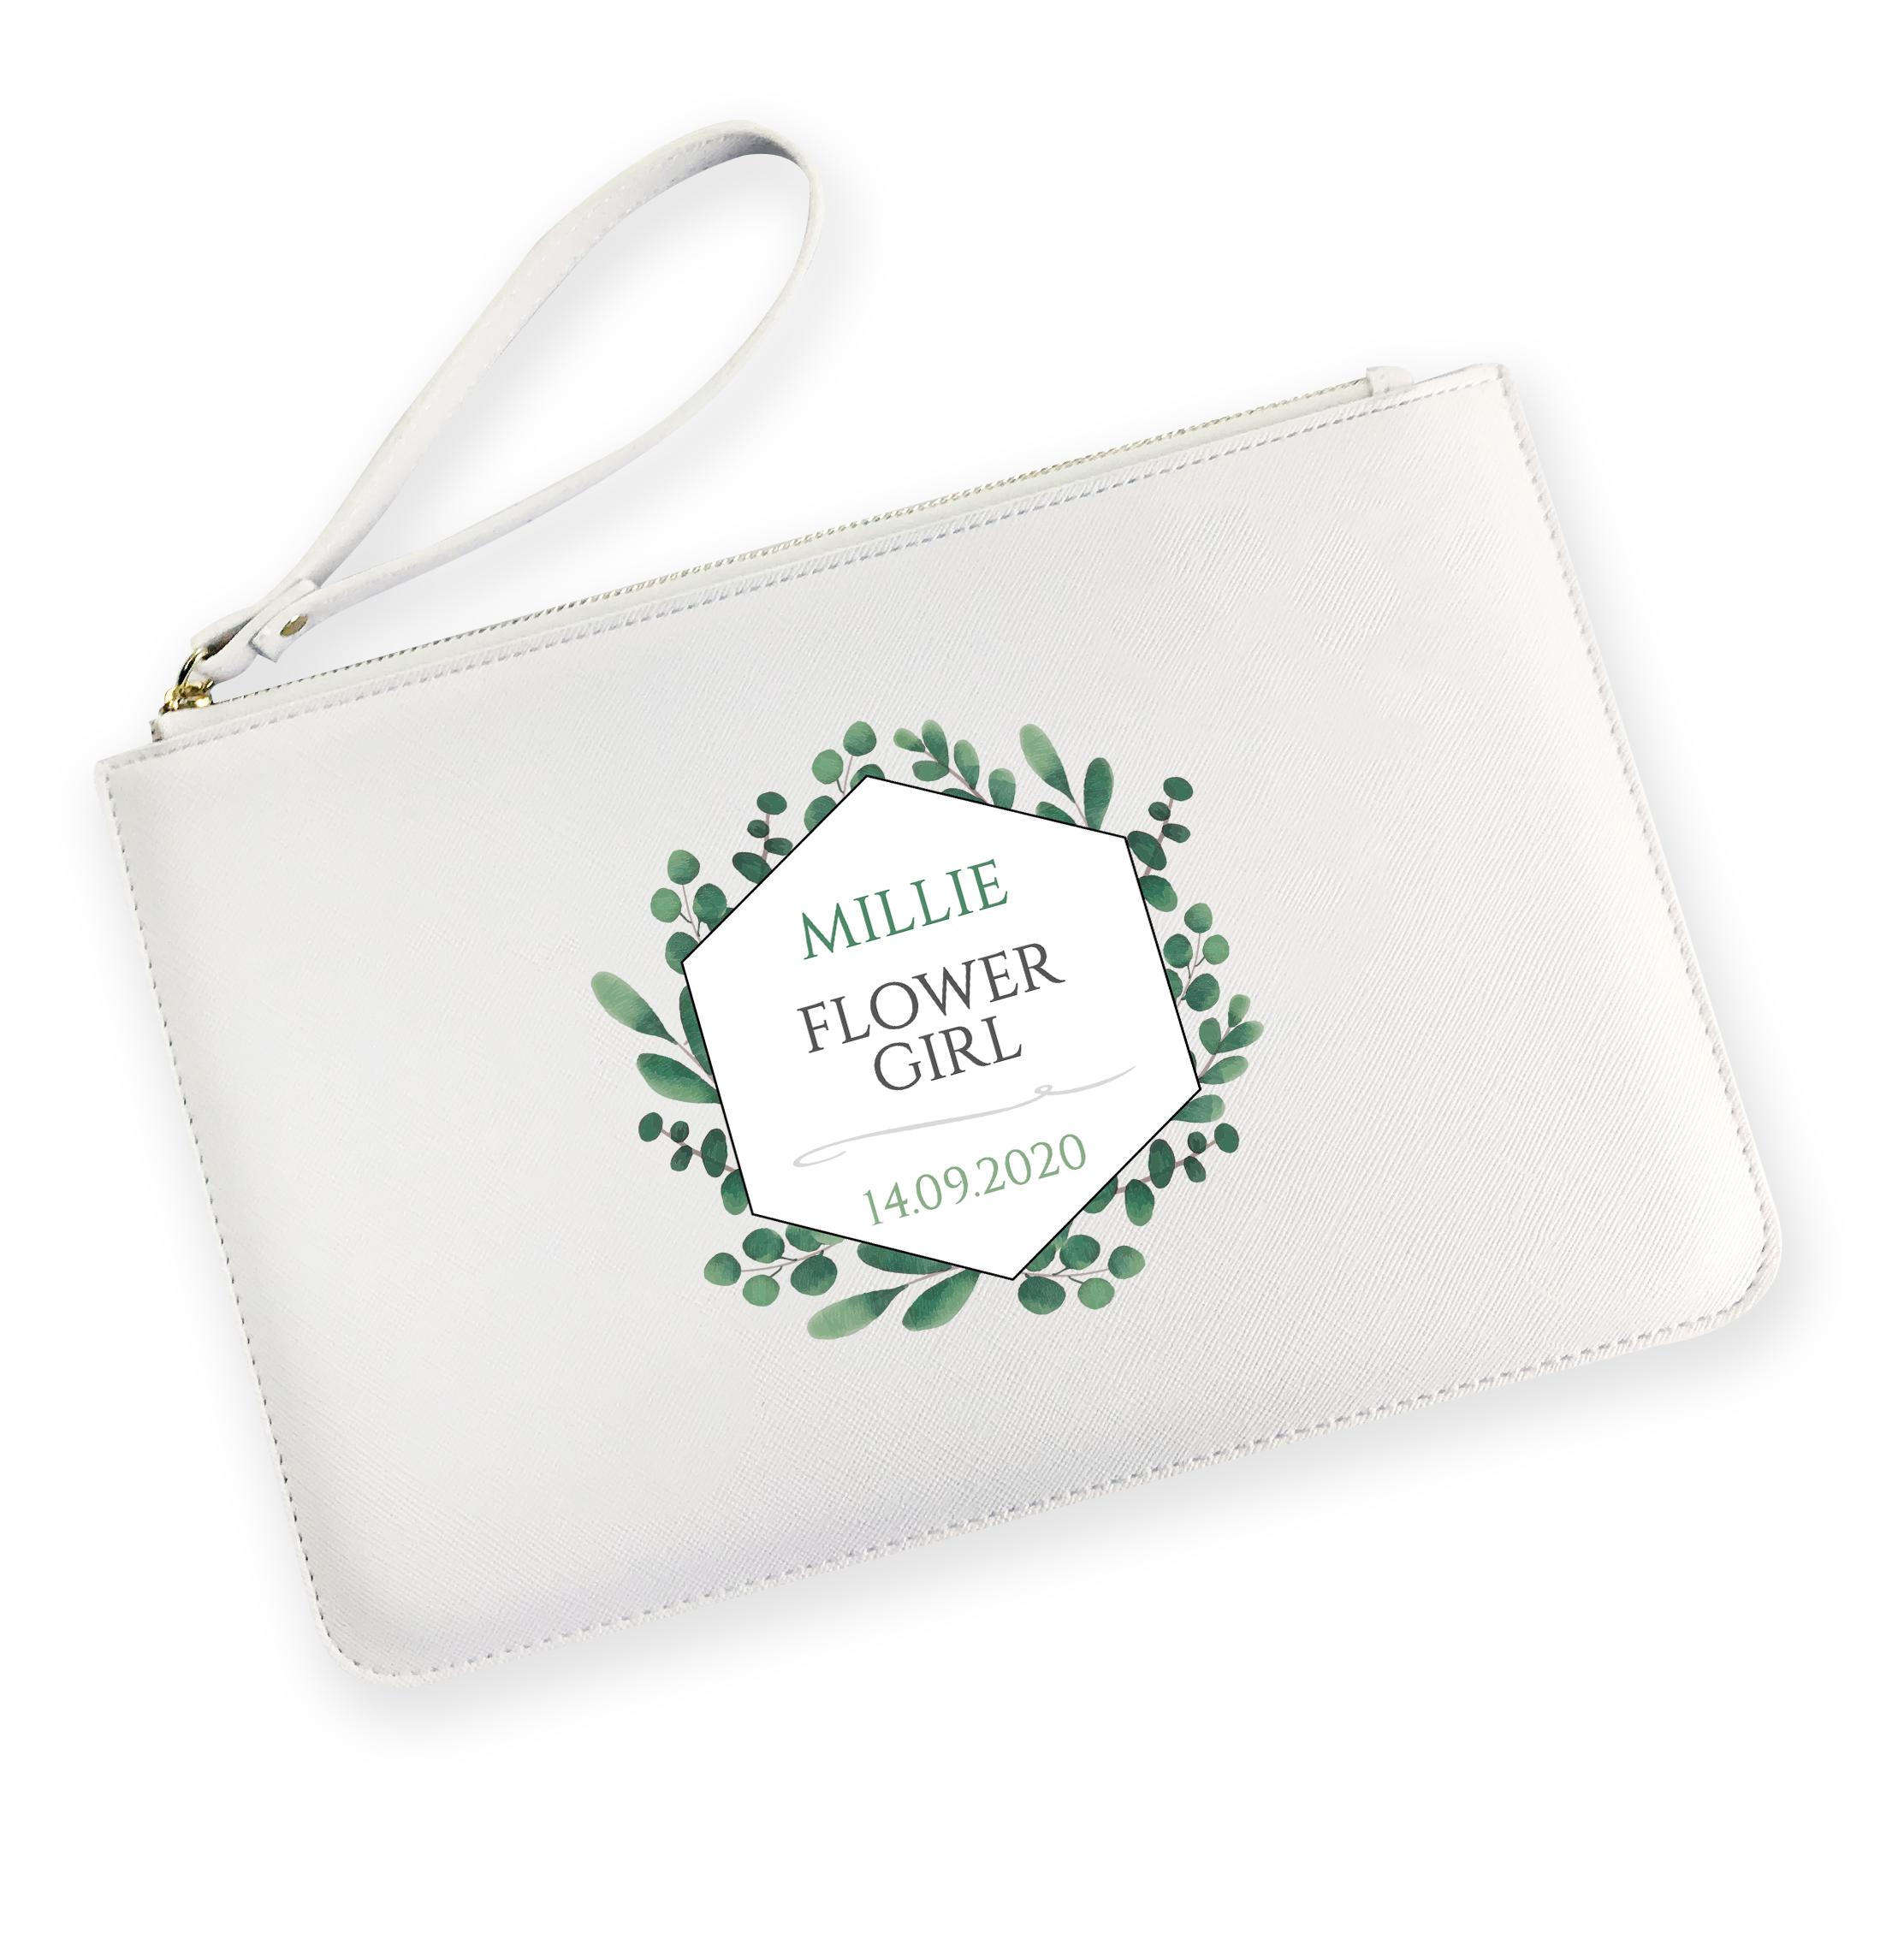 personalised clutch bags for bridesmaids